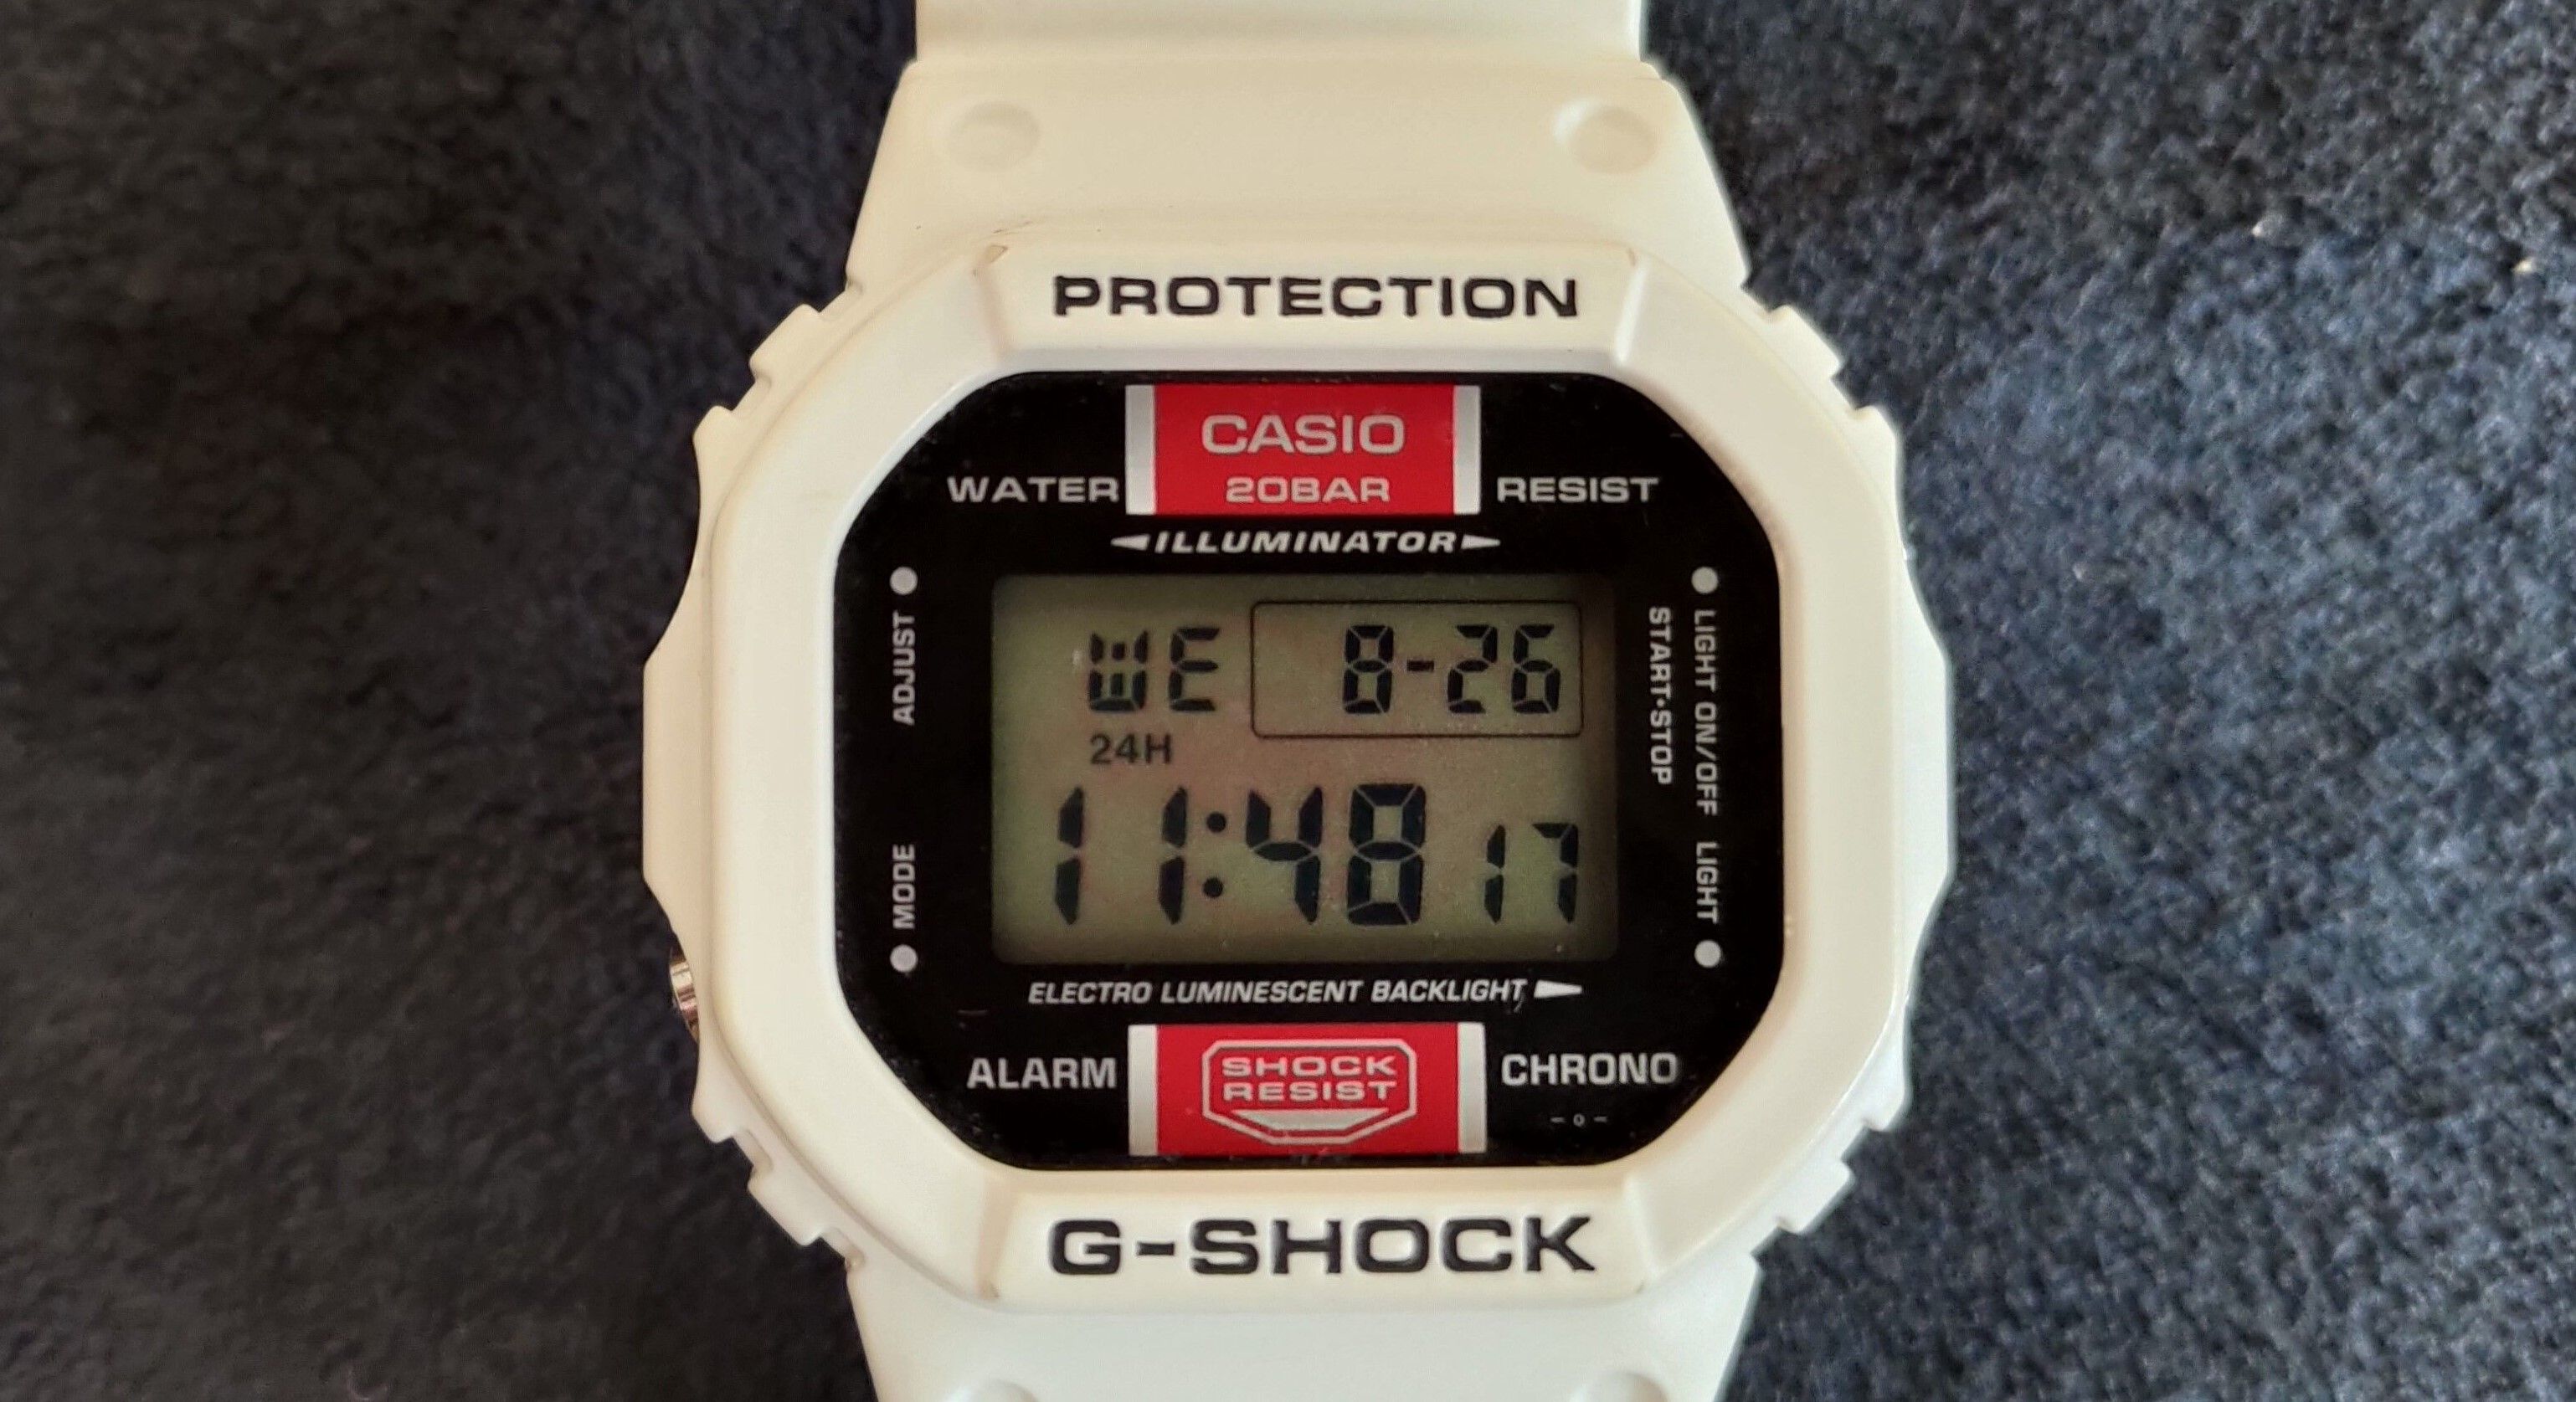 G-SHOCK(DW-5600)12年目で初！電池交換方法詳細とコツ | 衝動買い 